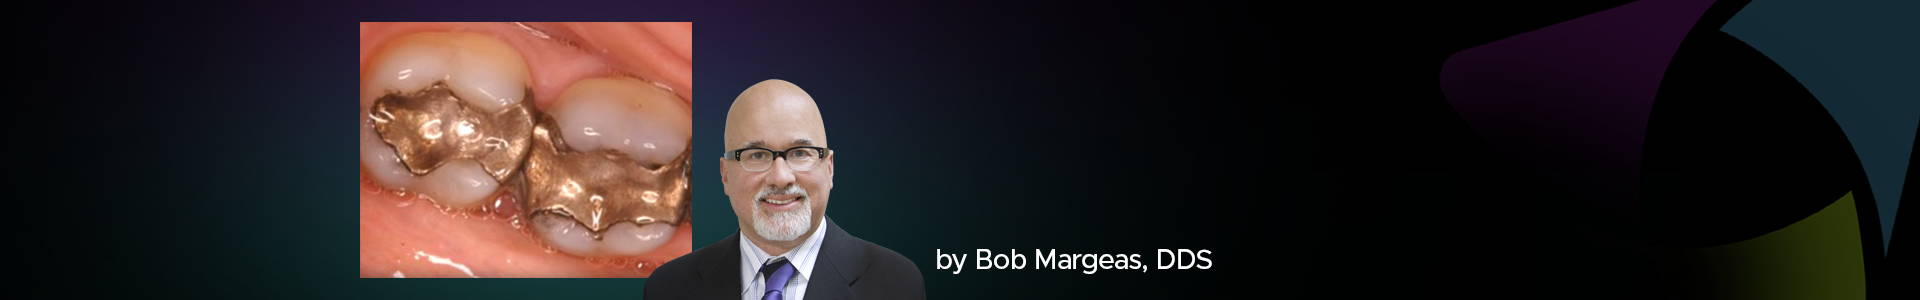 blog banner featuring Dr Bob Margeas and a clinical image